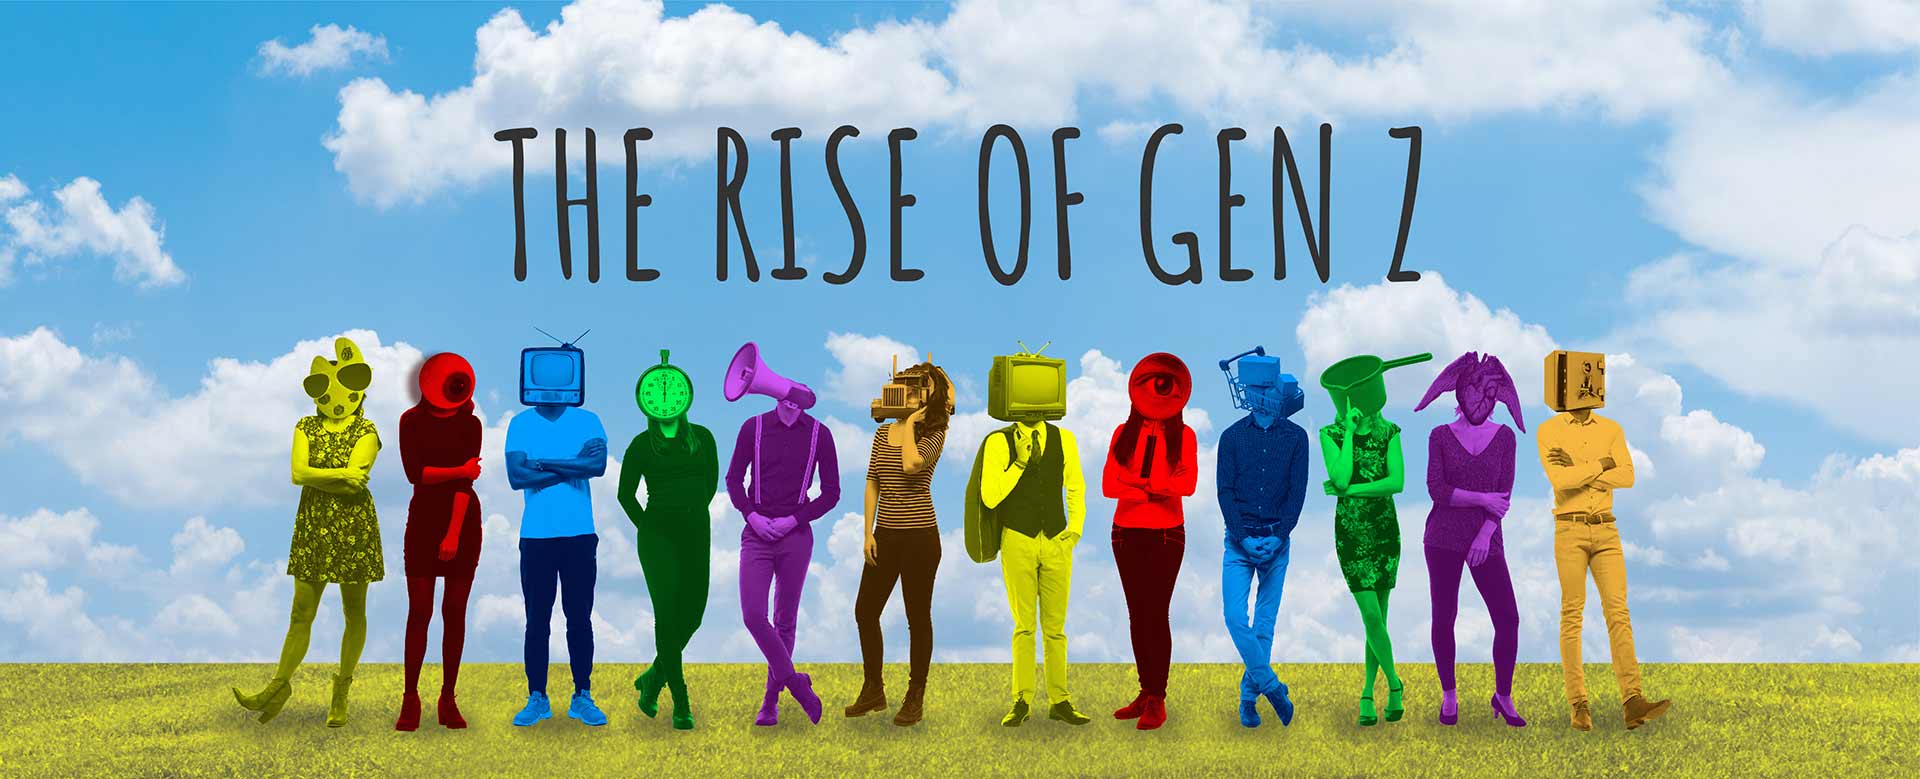 The Rise of Gen Z